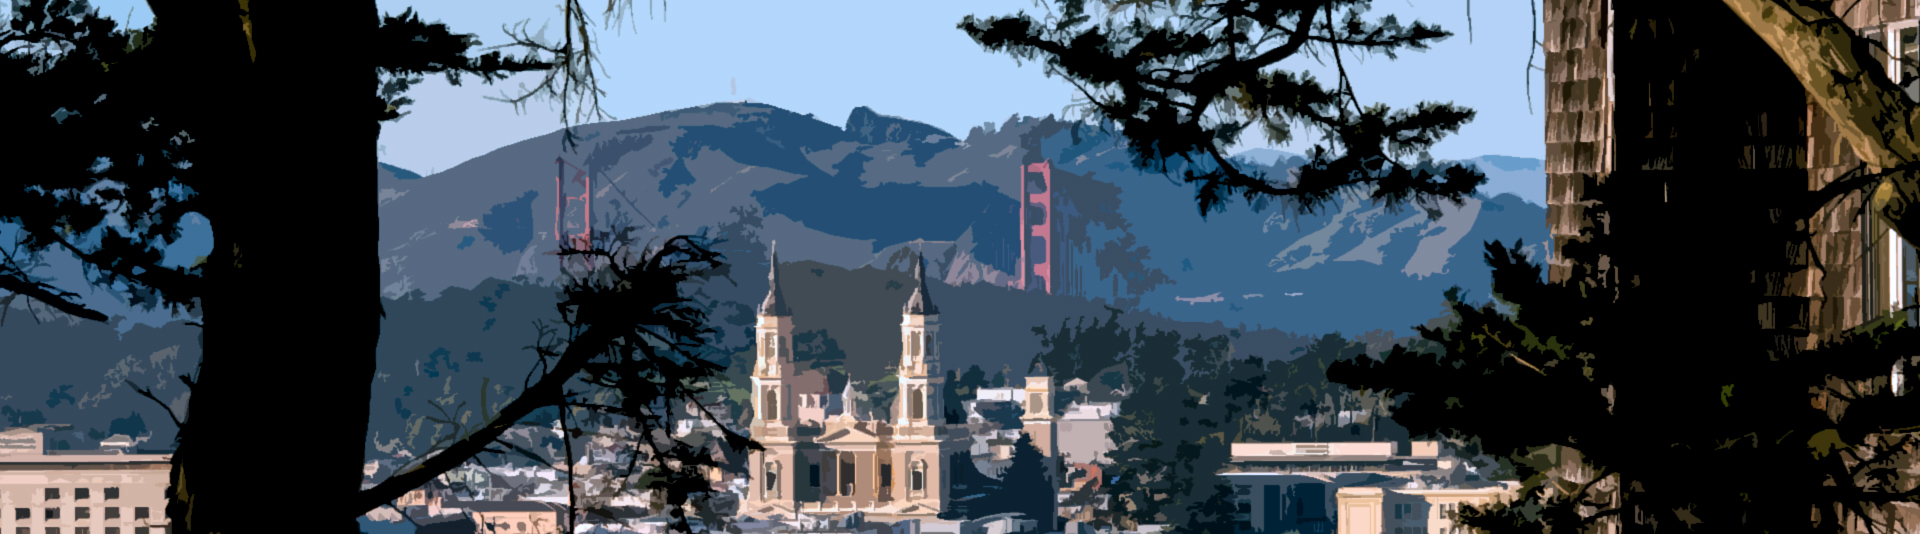 A view of San Francisco, featuring Mission Dolores Basilica and the Golden Gate Bridge